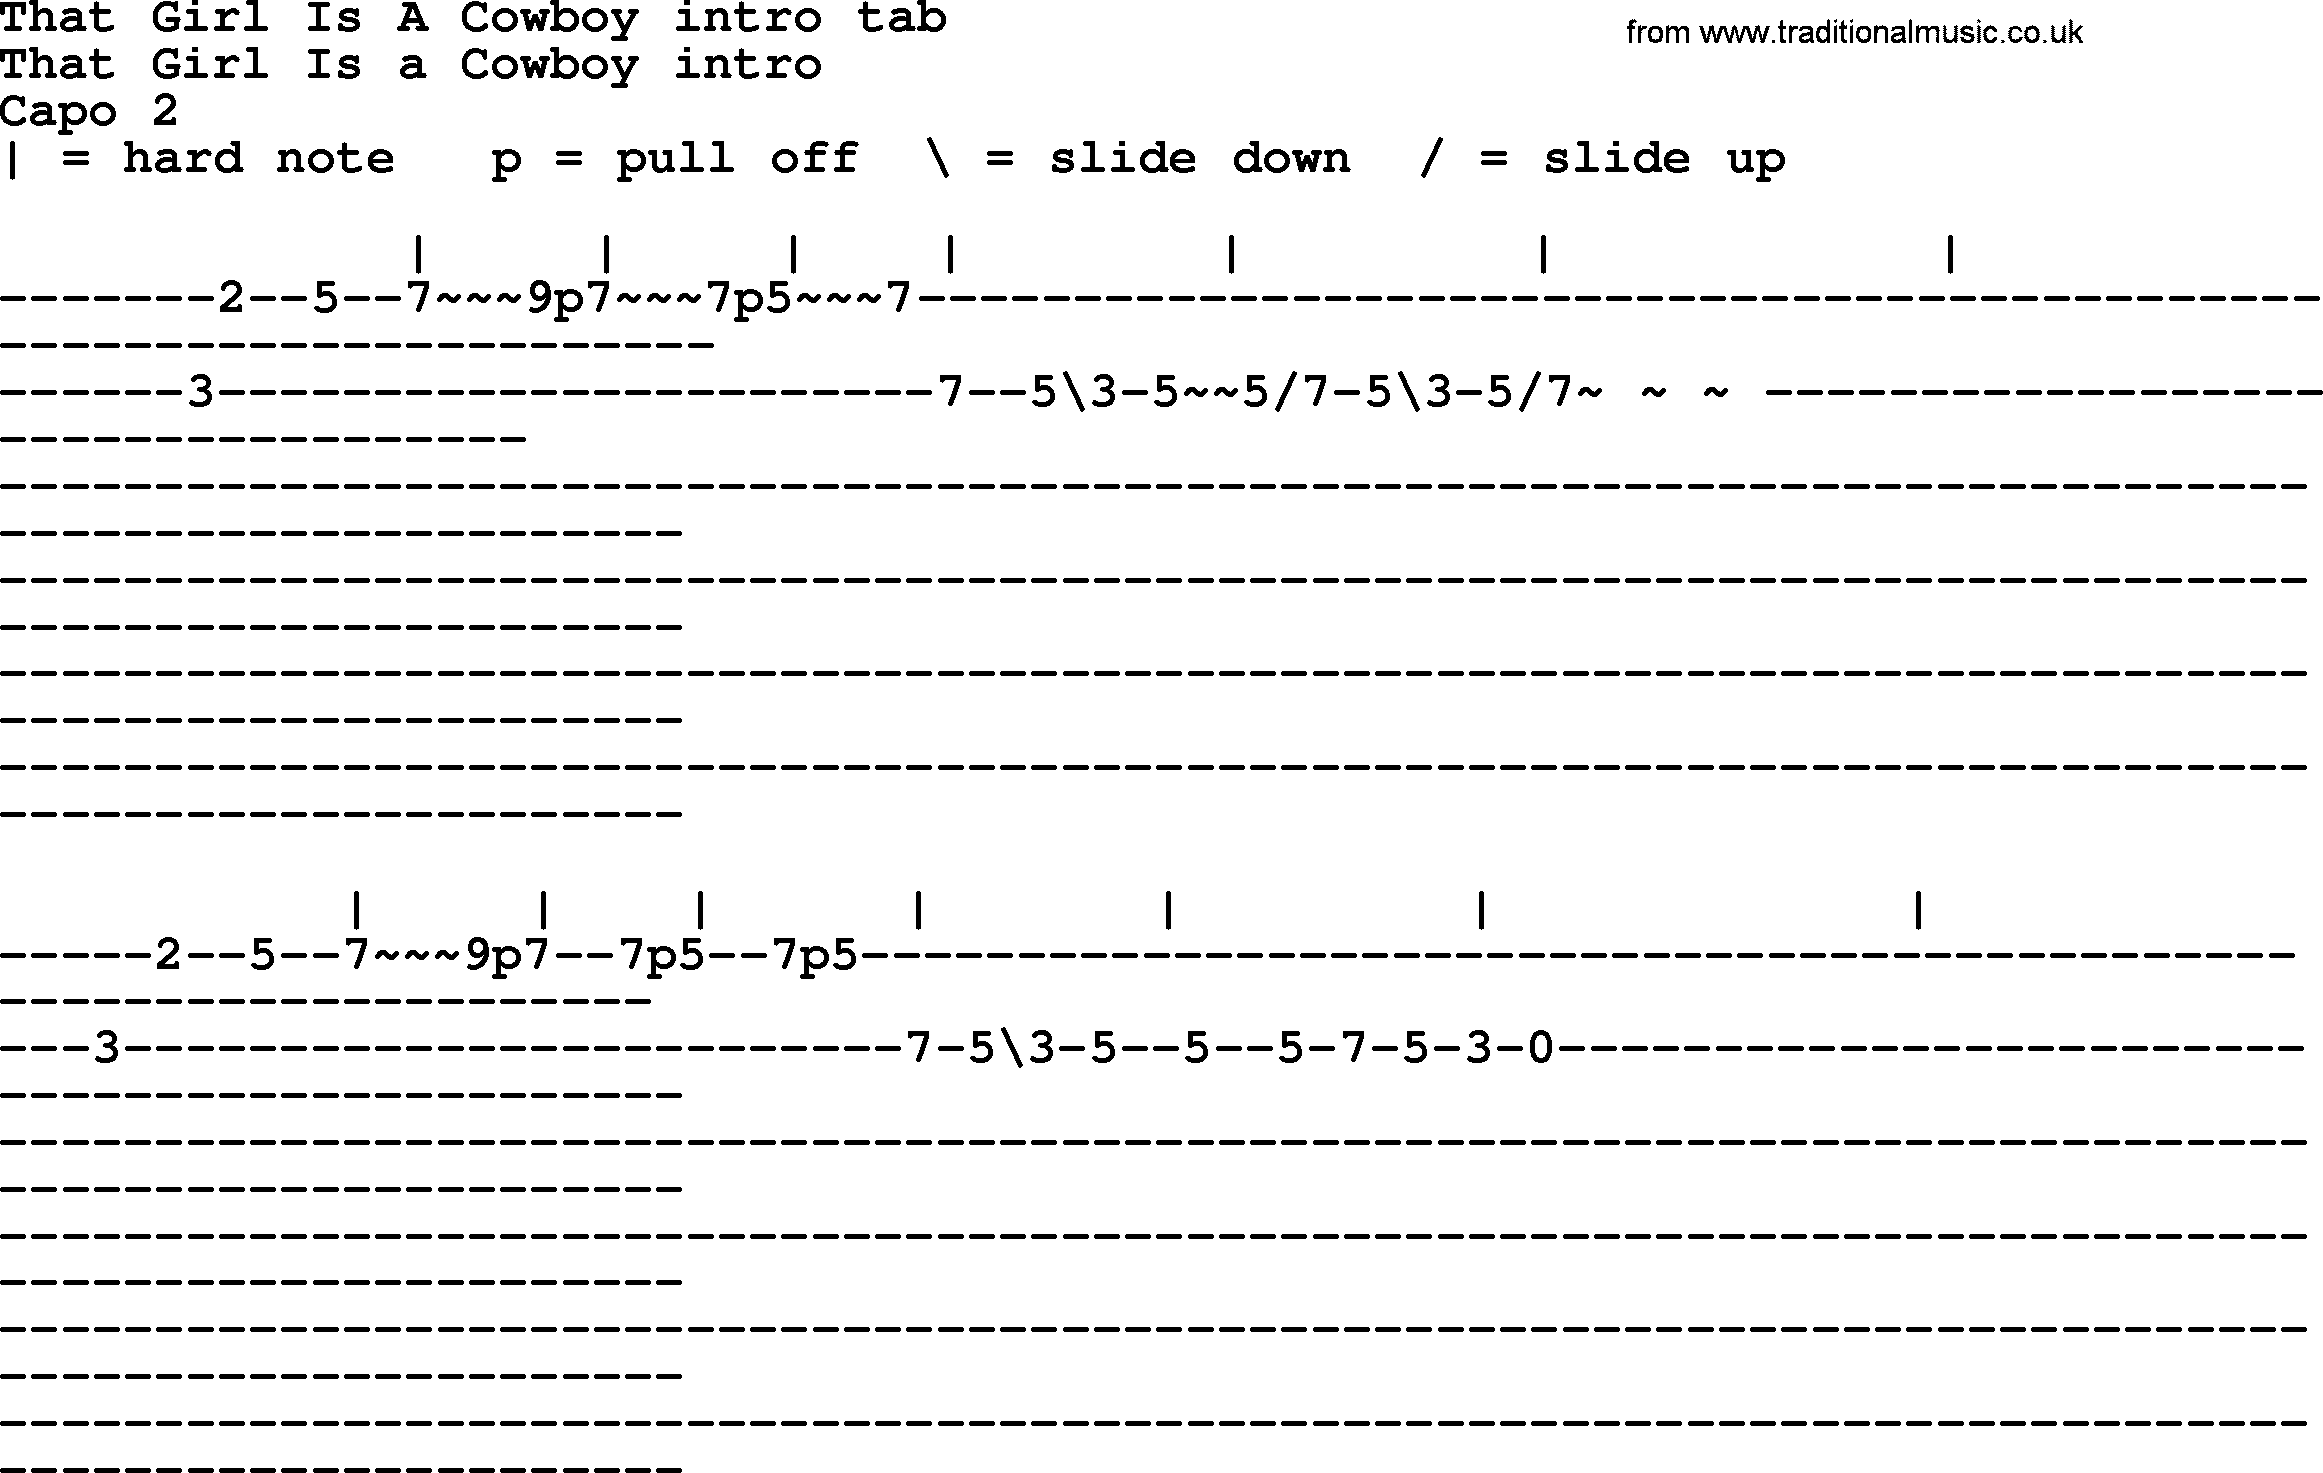 Garth Brooks song: That Girl Is A Cowboy Intro Tab, lyrics and chords